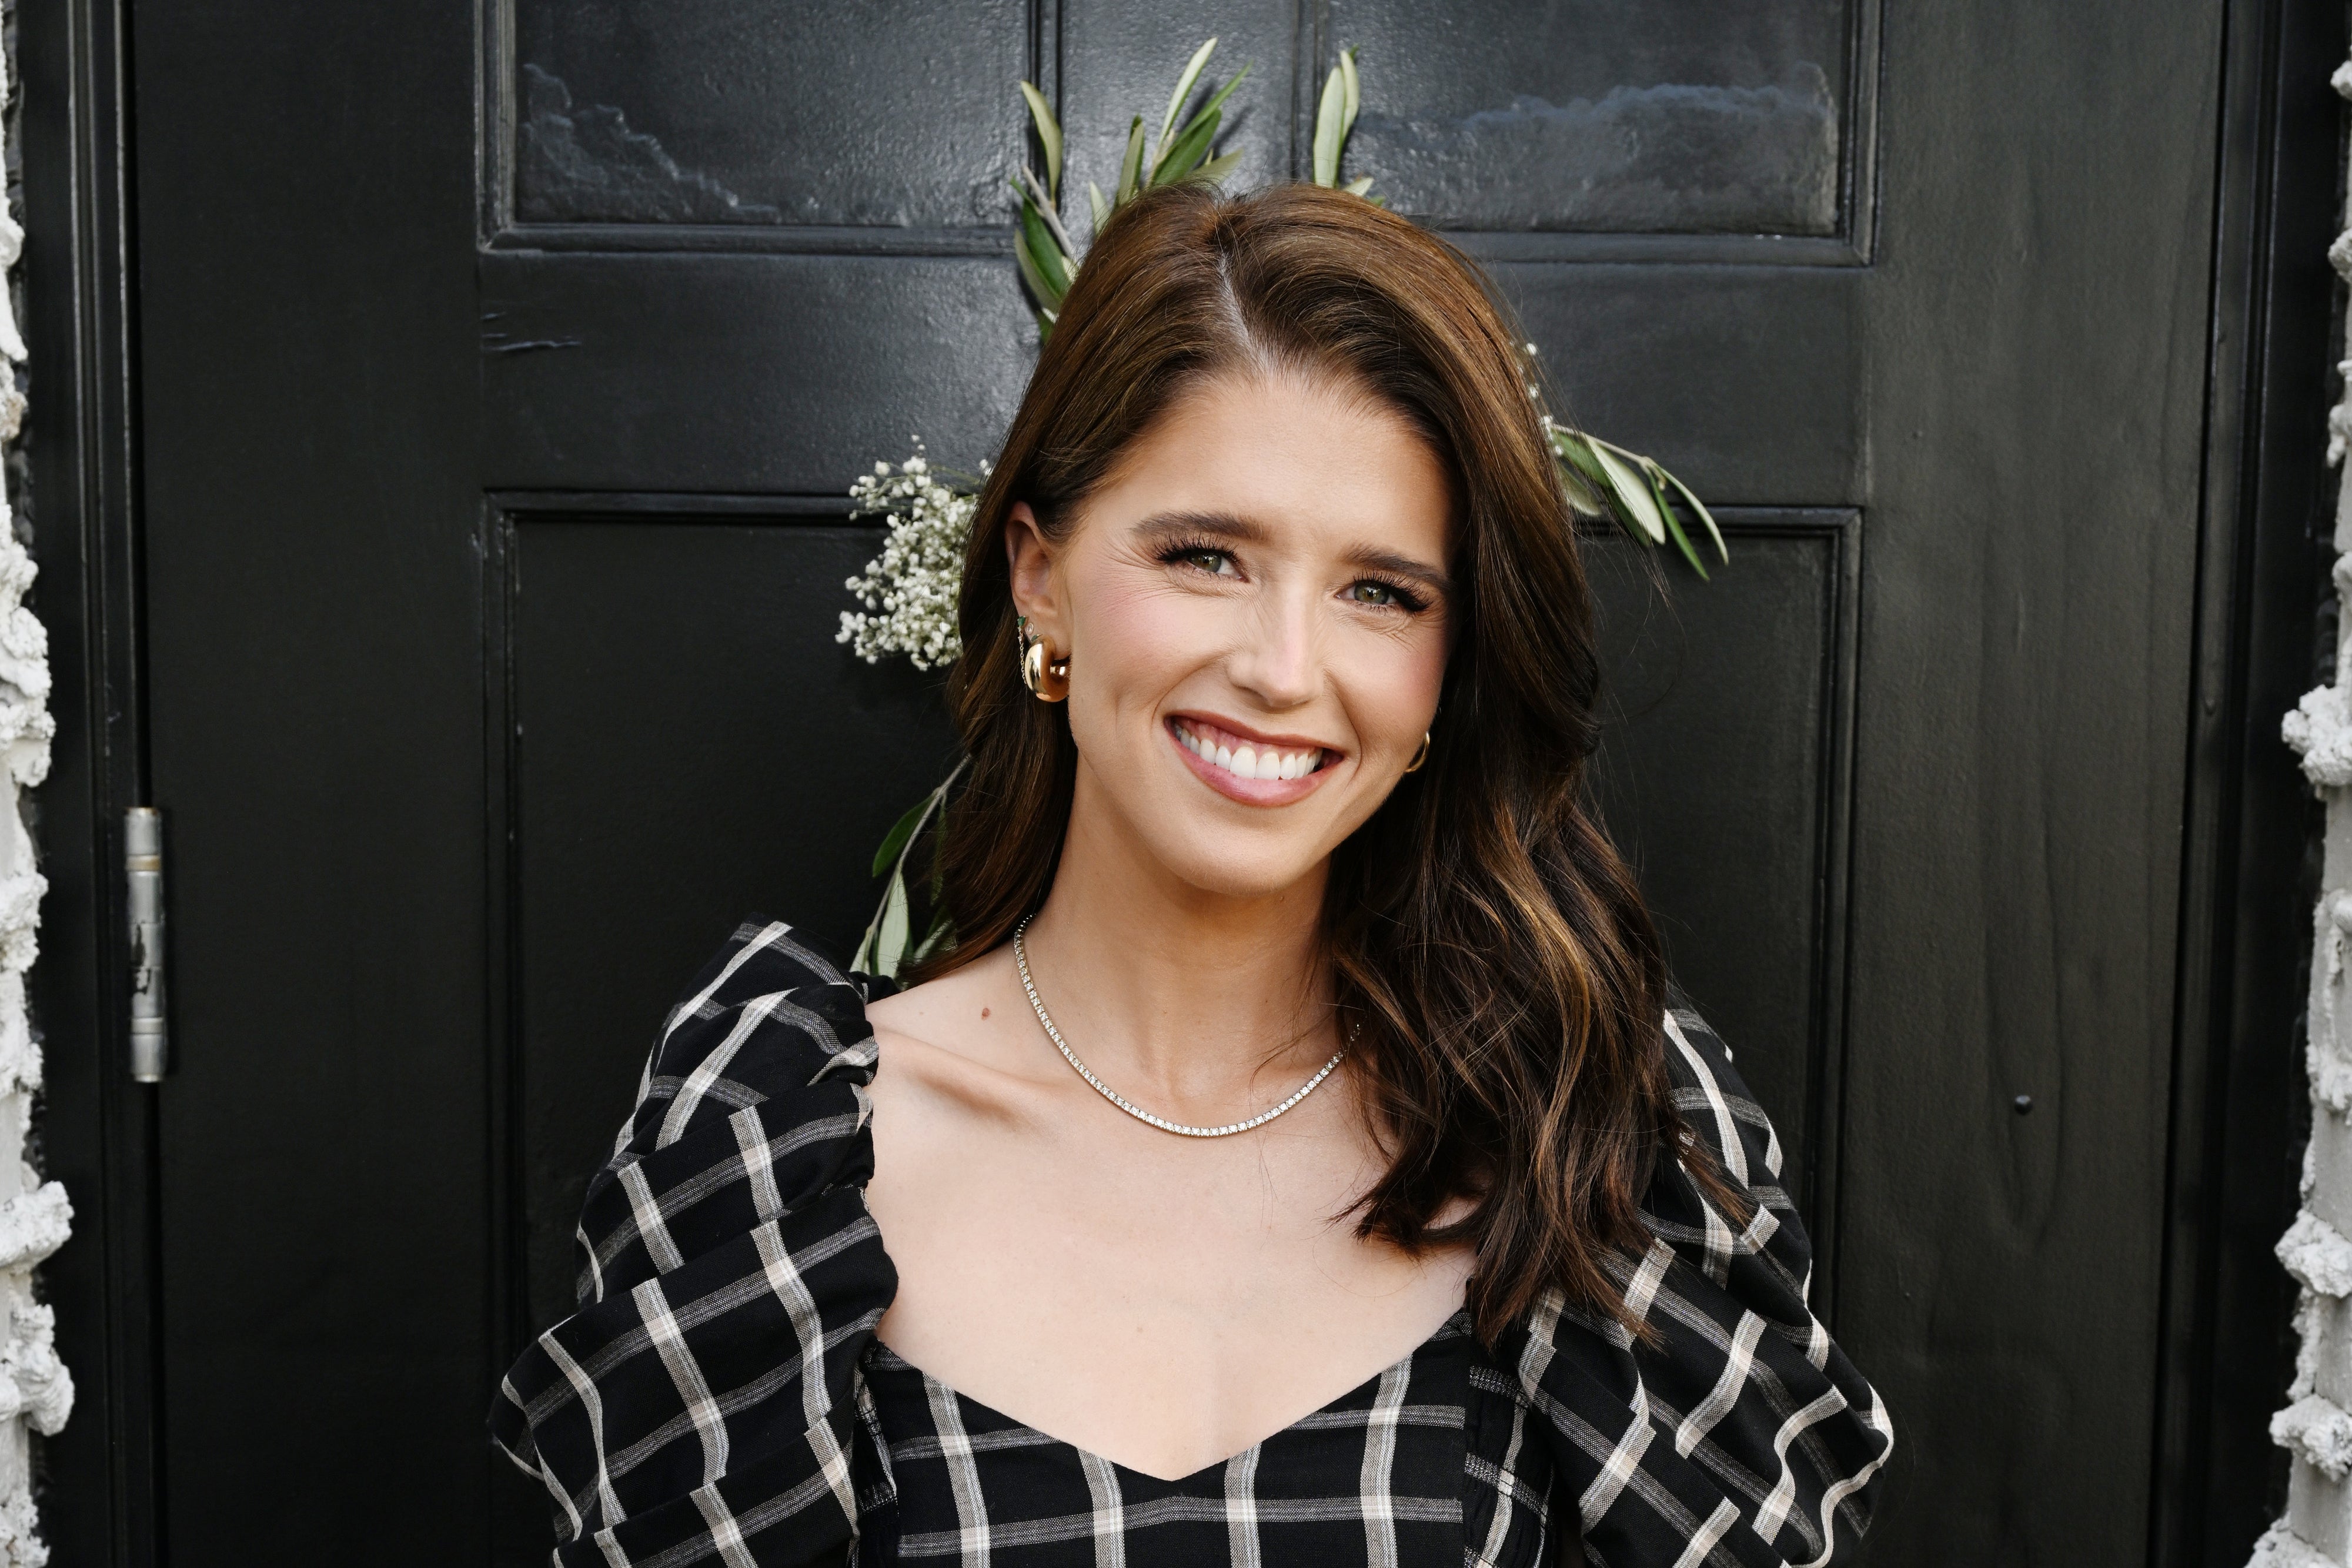 Katherine Schwarzenegger Randomly Called Out The Met Gala For Not Being "Classy" Anymore